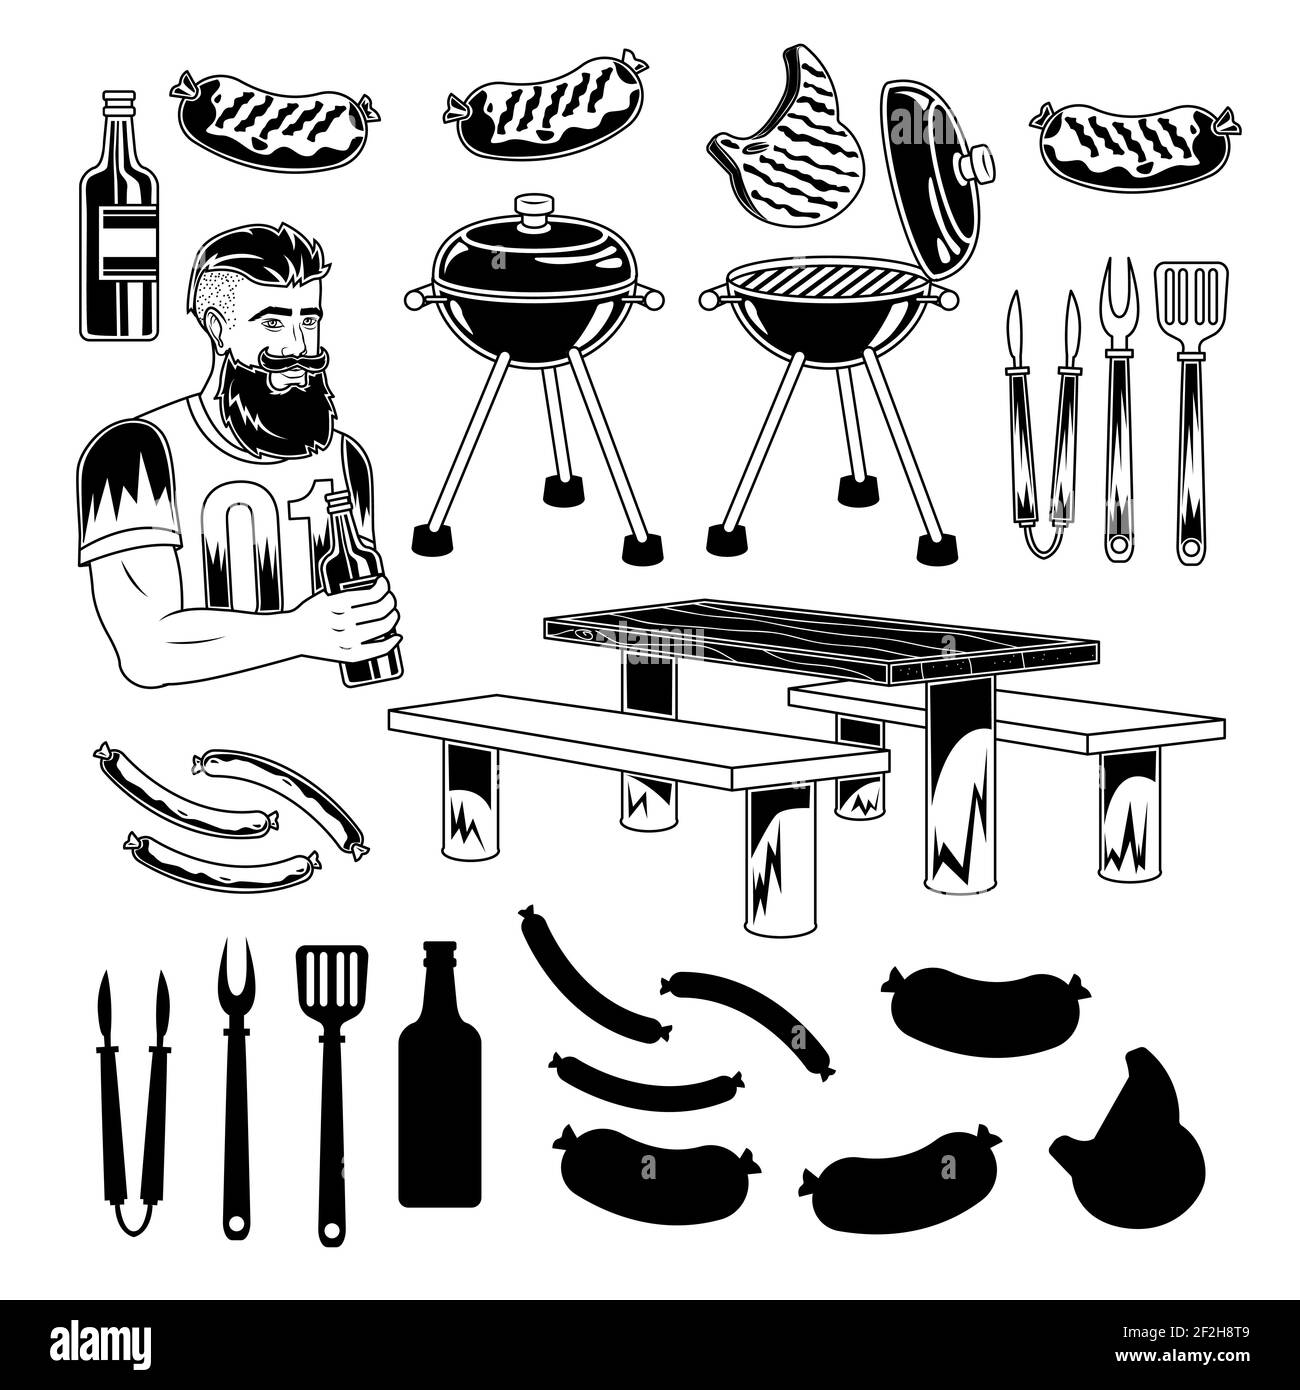 Bbq set barbecue equipment and meat icon Vector Image